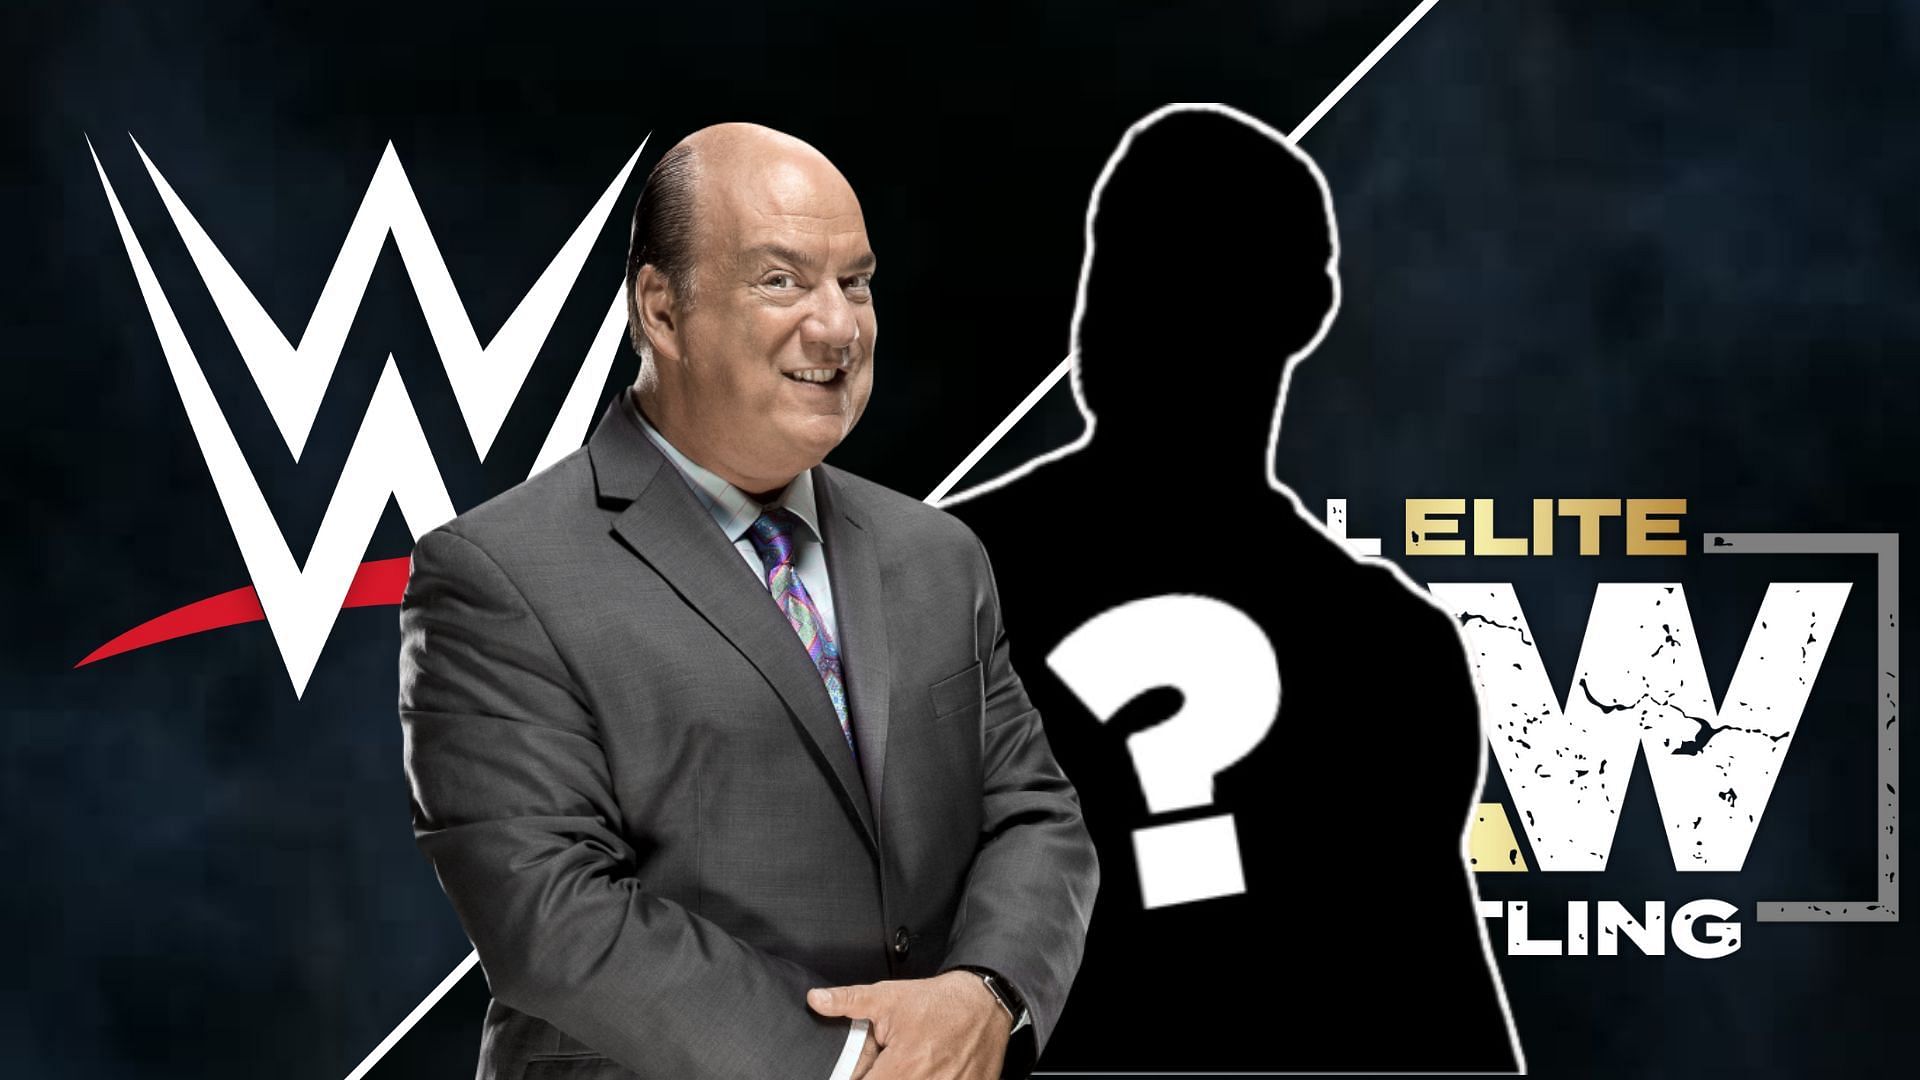 Paul Heyman stands by the side of Roman Reigns in WWE